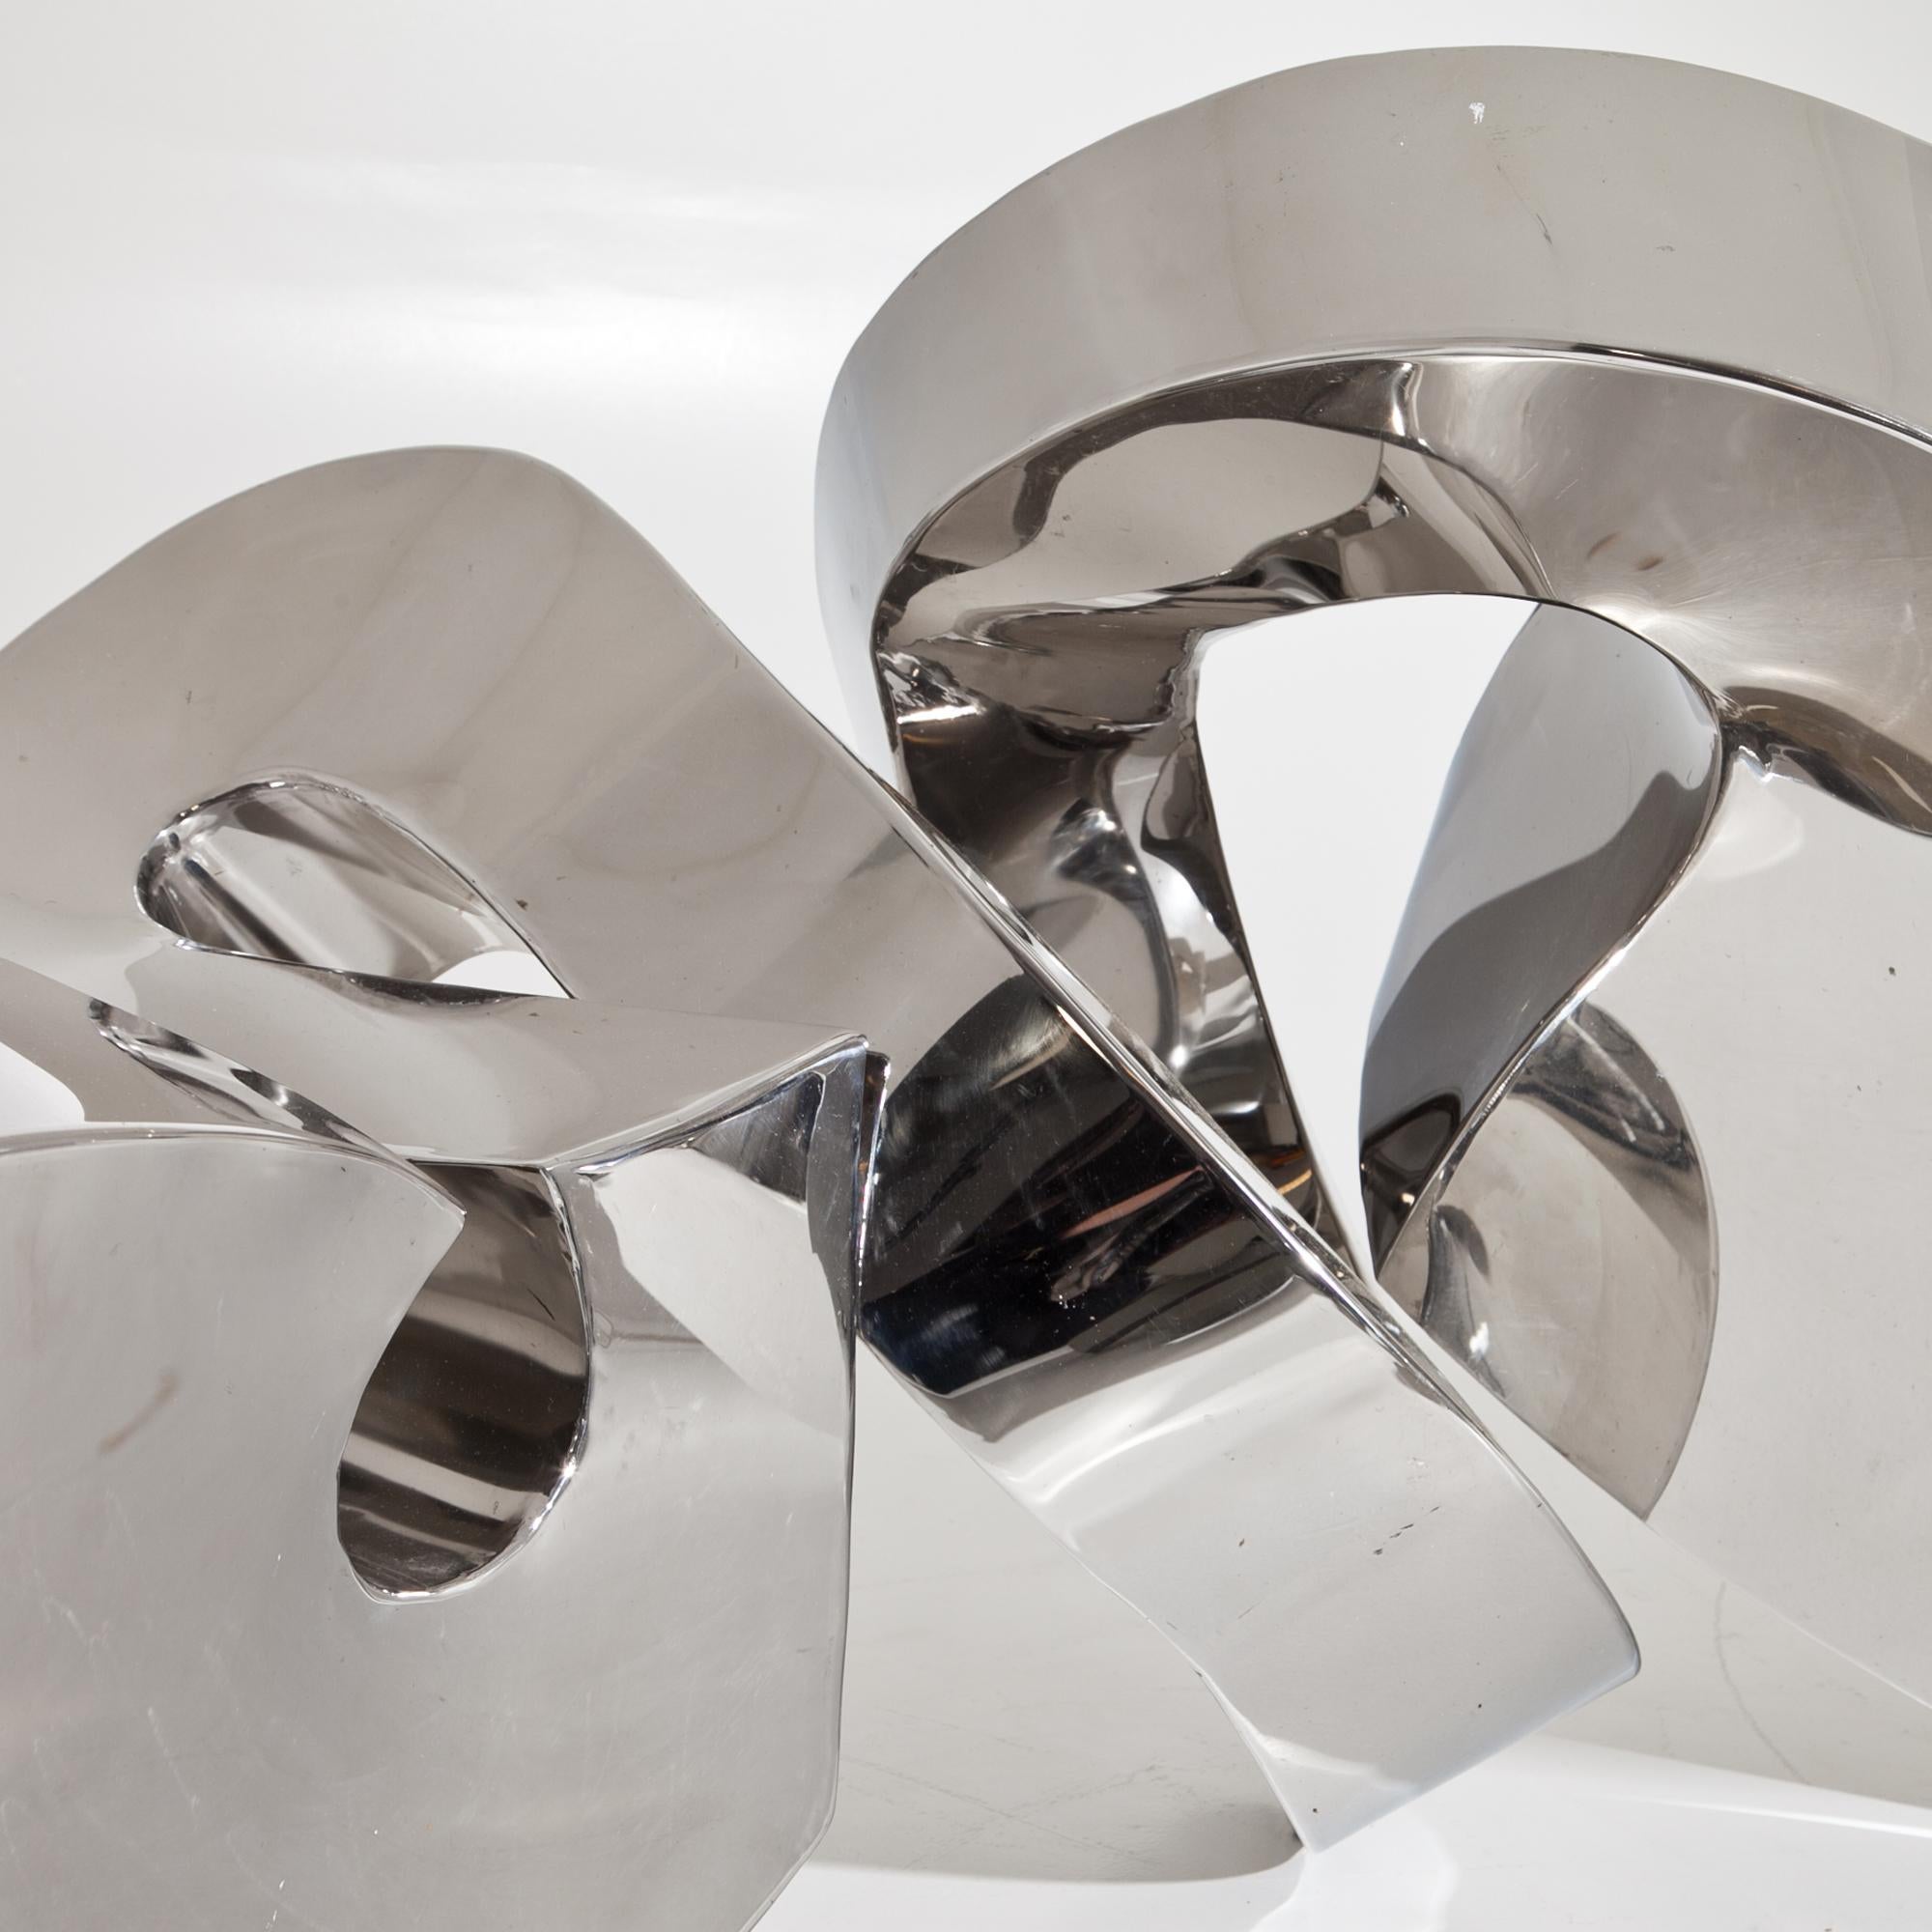 REFLEKTOR, Jörg Bach, 2013, polished Stainless Steel, Abstract Sculpture, Germany For Sale 2